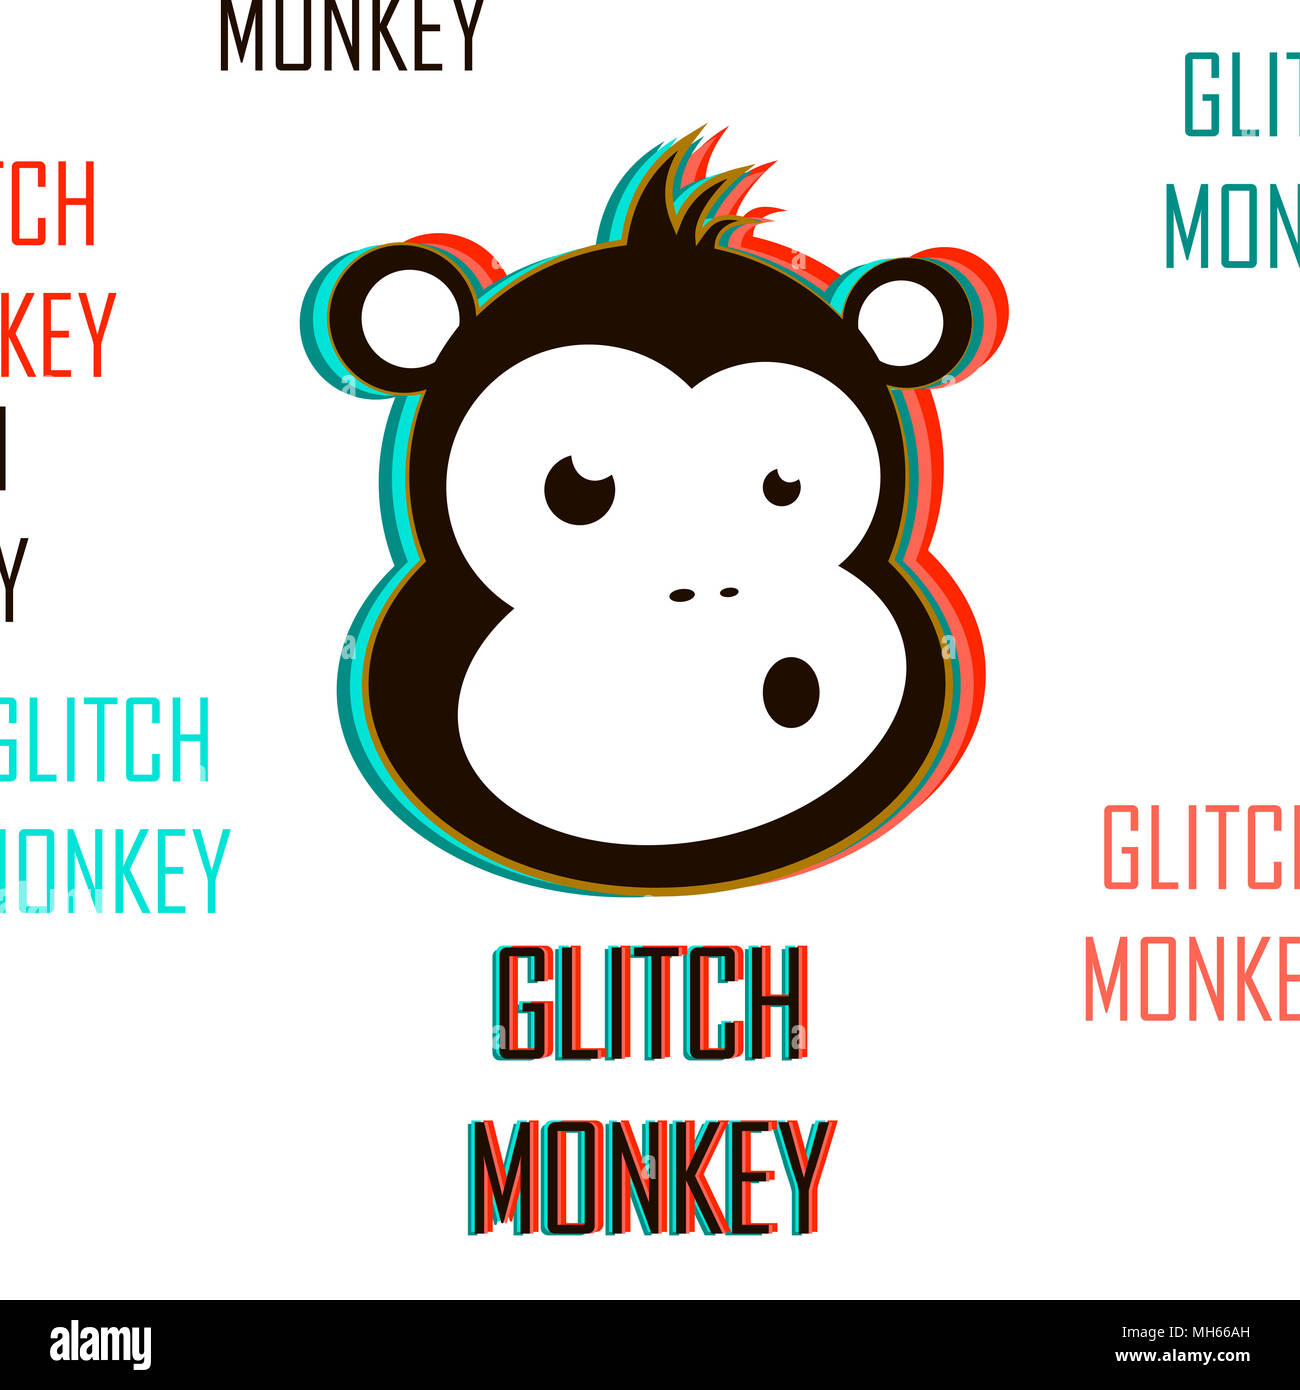 Vector monkey illustration with glitch effect. Modern style icon. Stock Photo